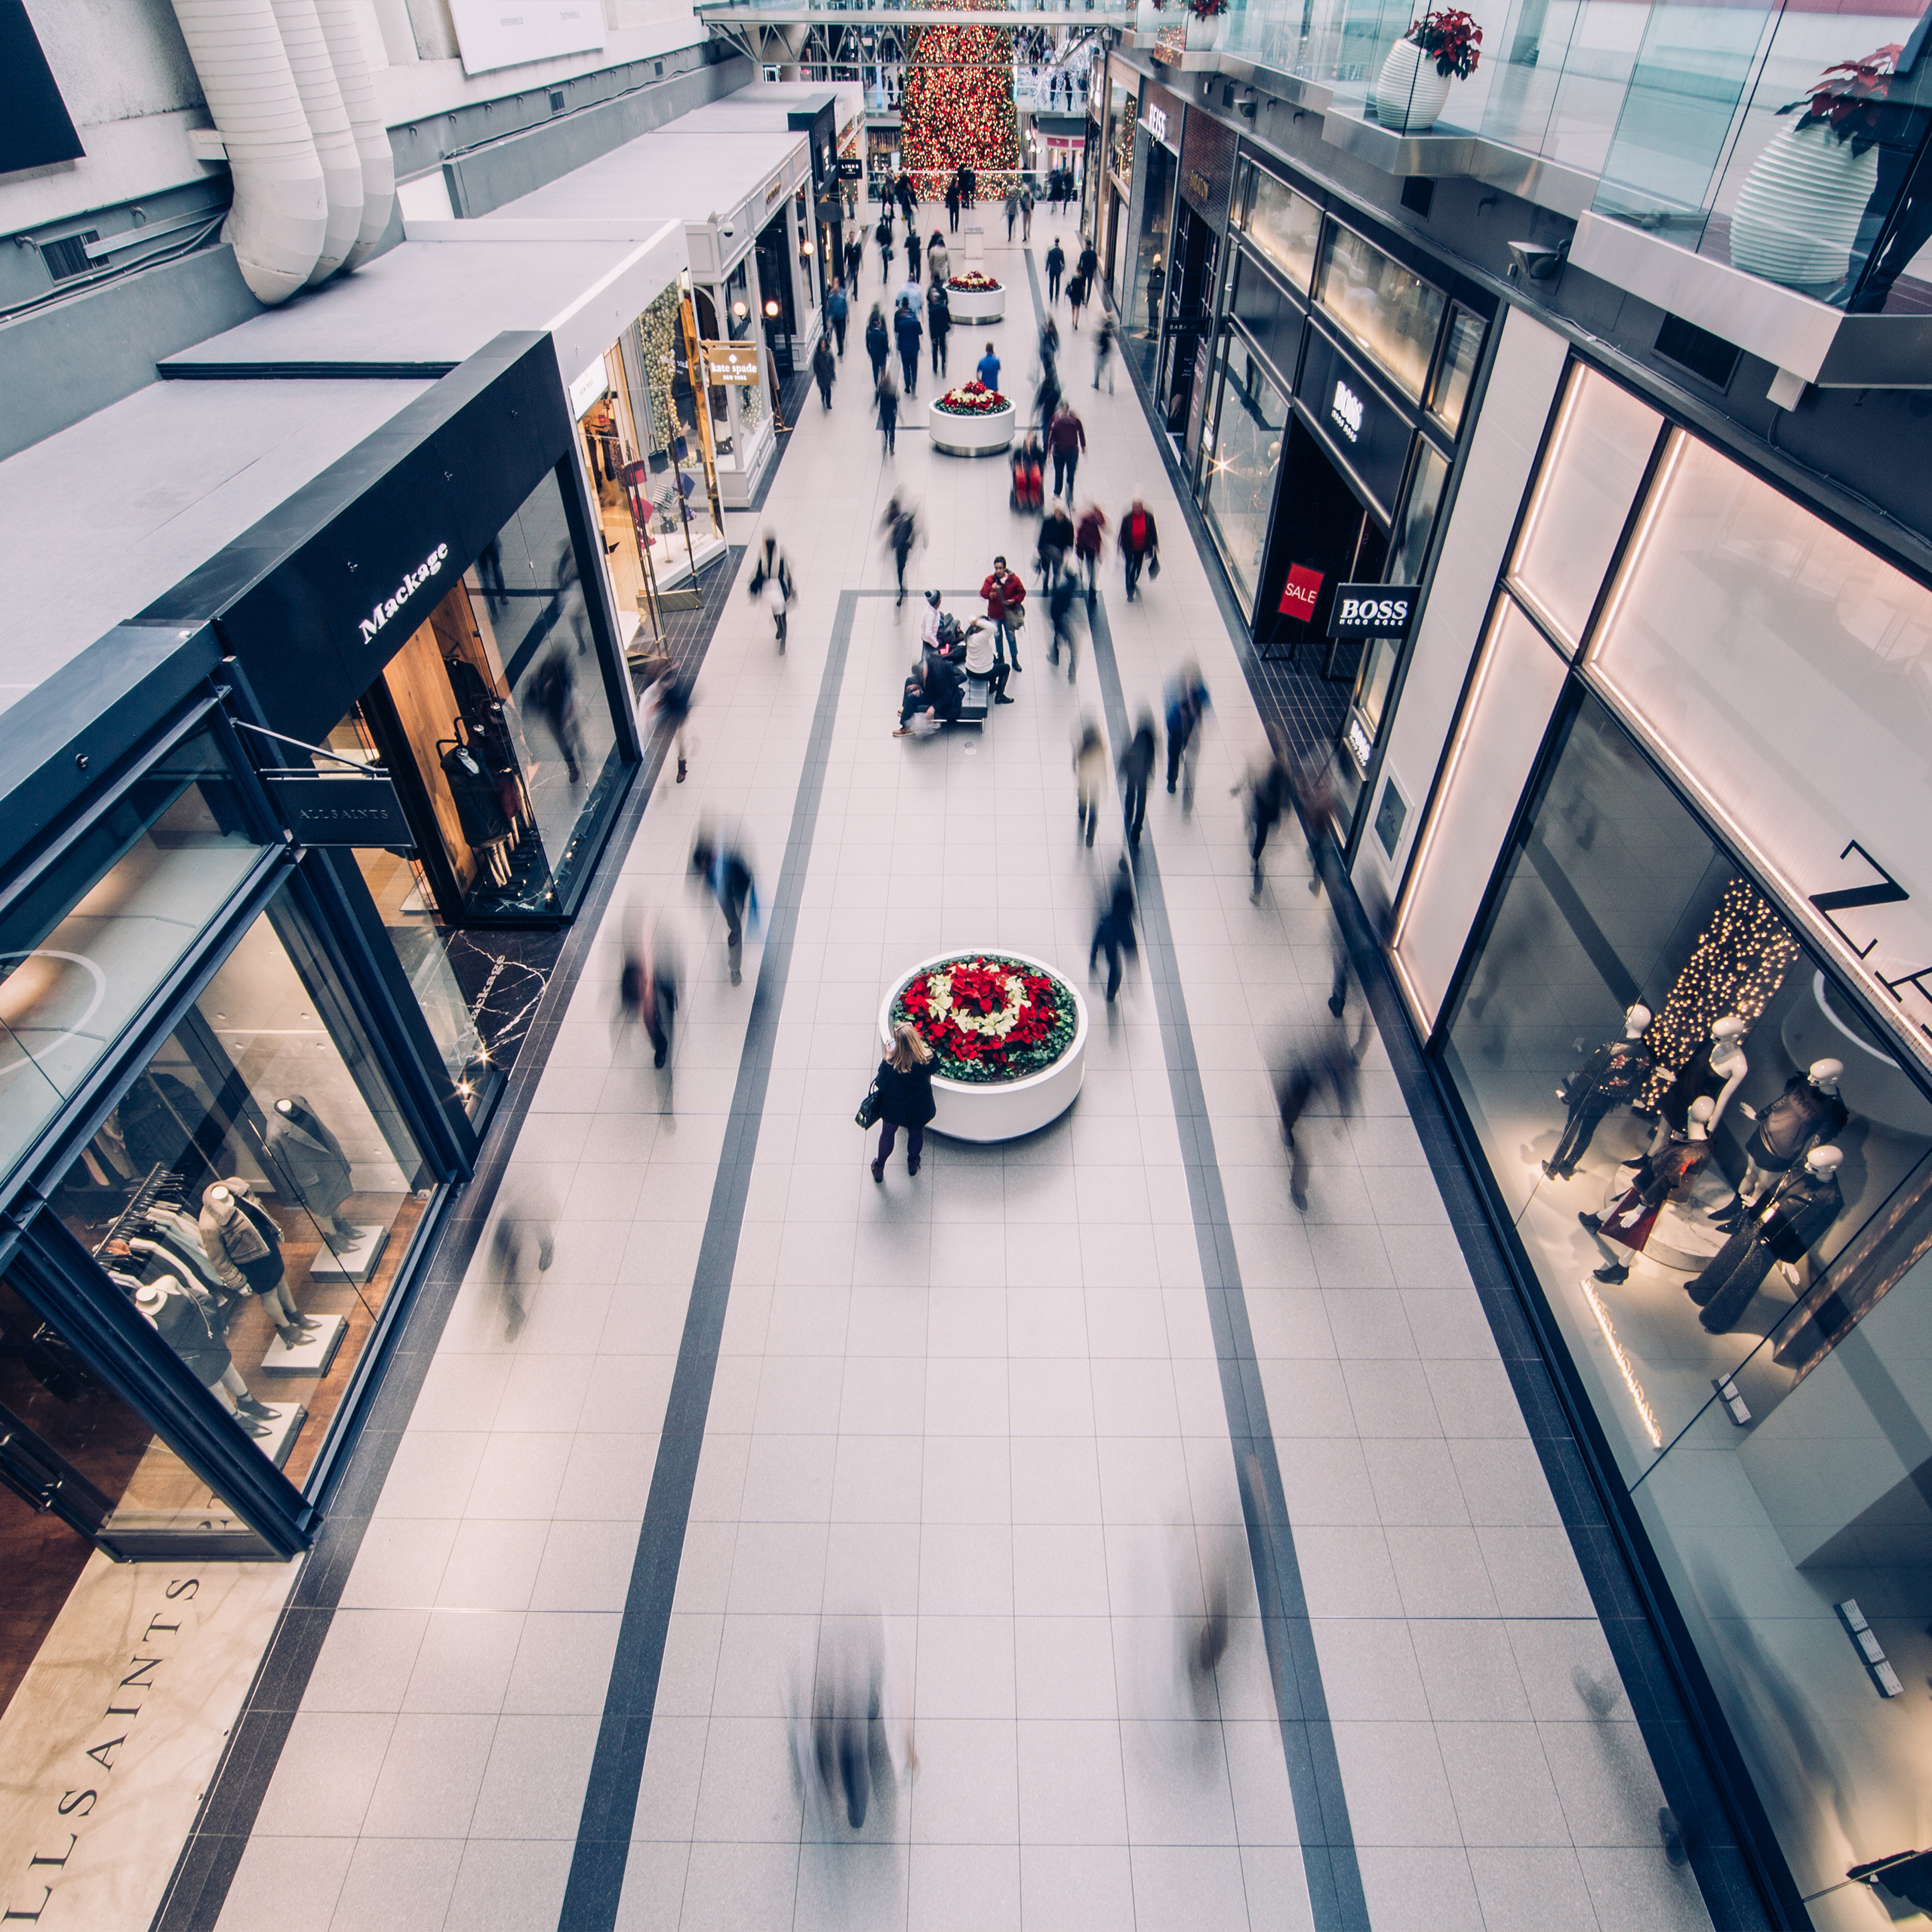 Gifts & Lifestyle Middle East Industry News - UAE’s retail market is forecast to grow by 0.4 per cent this year despite the pandemic